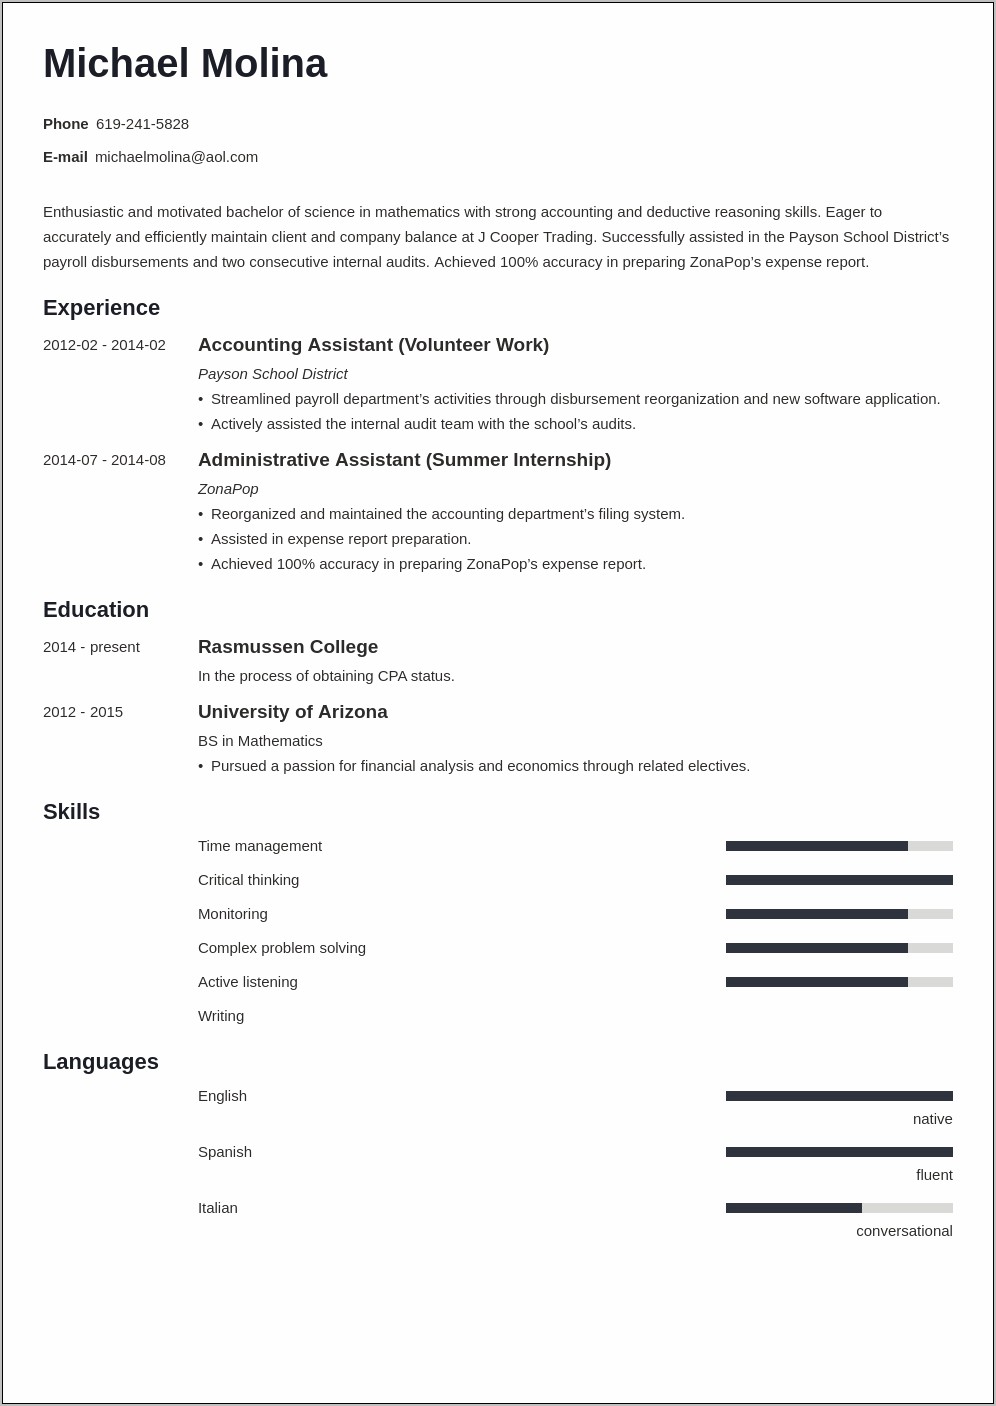 Entry Level Accounting Jobs With No Experience Resume